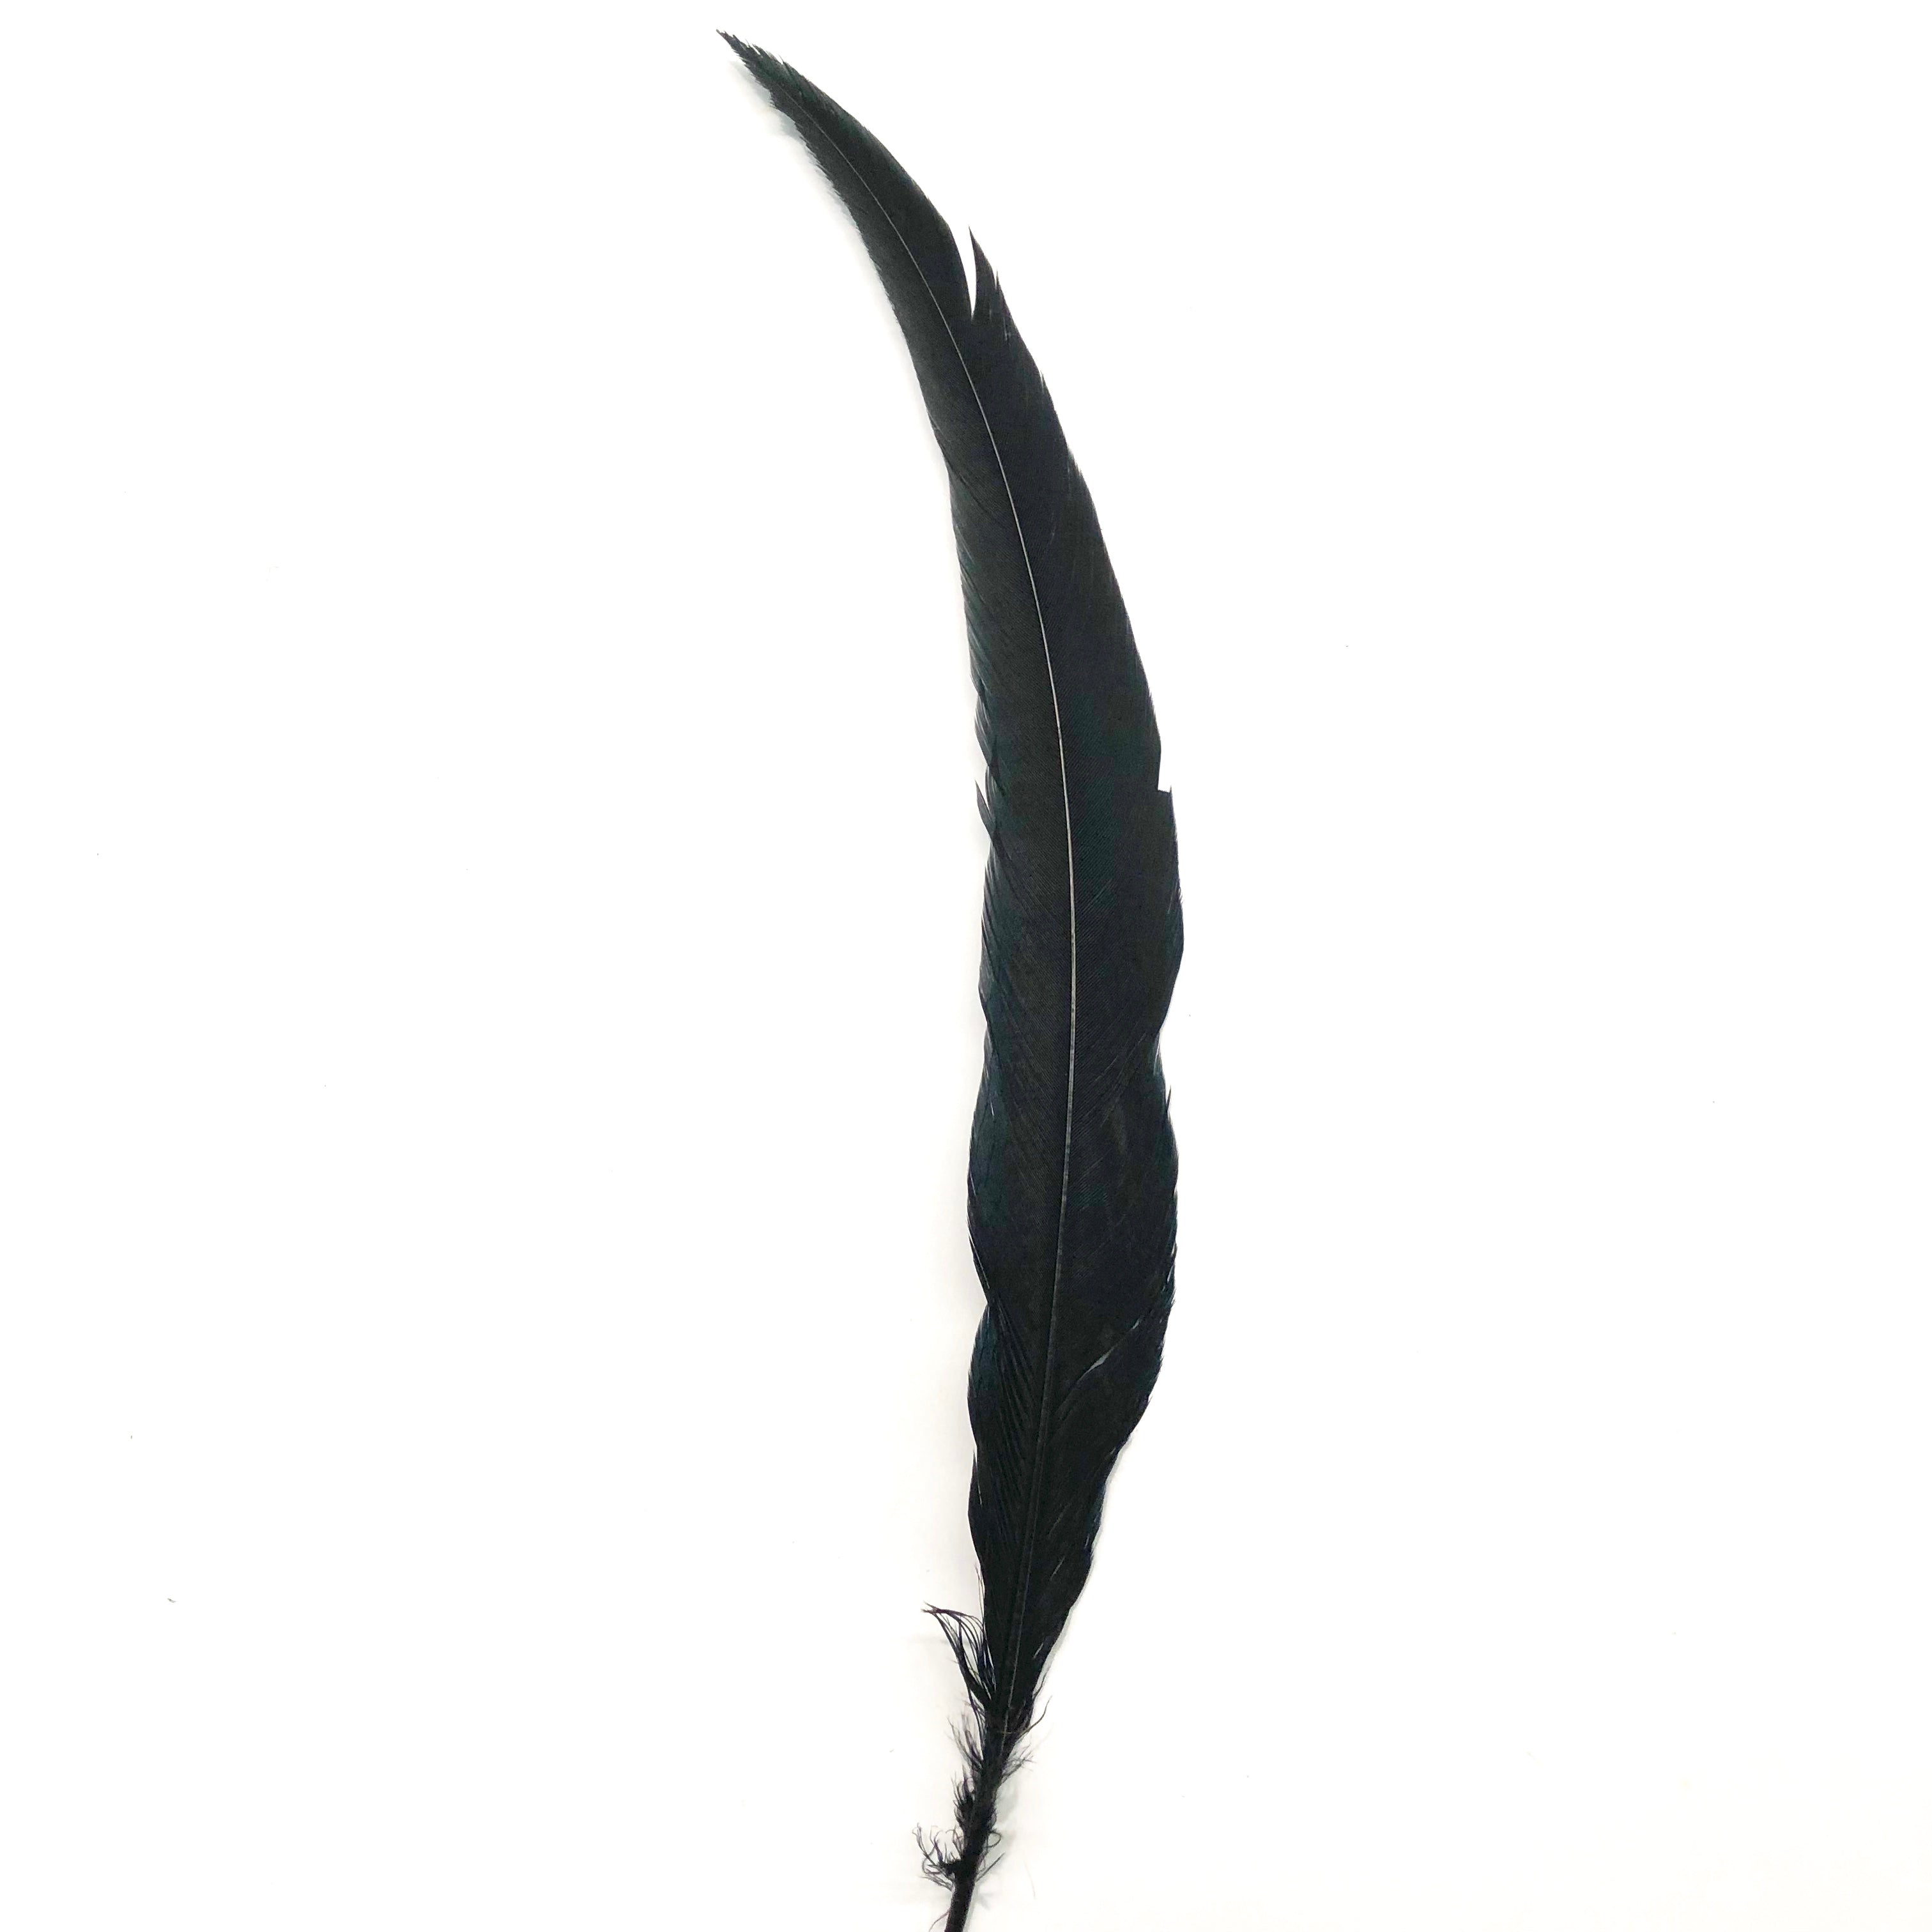 20" to 30" Silver Pheasant Tail Feather - Black